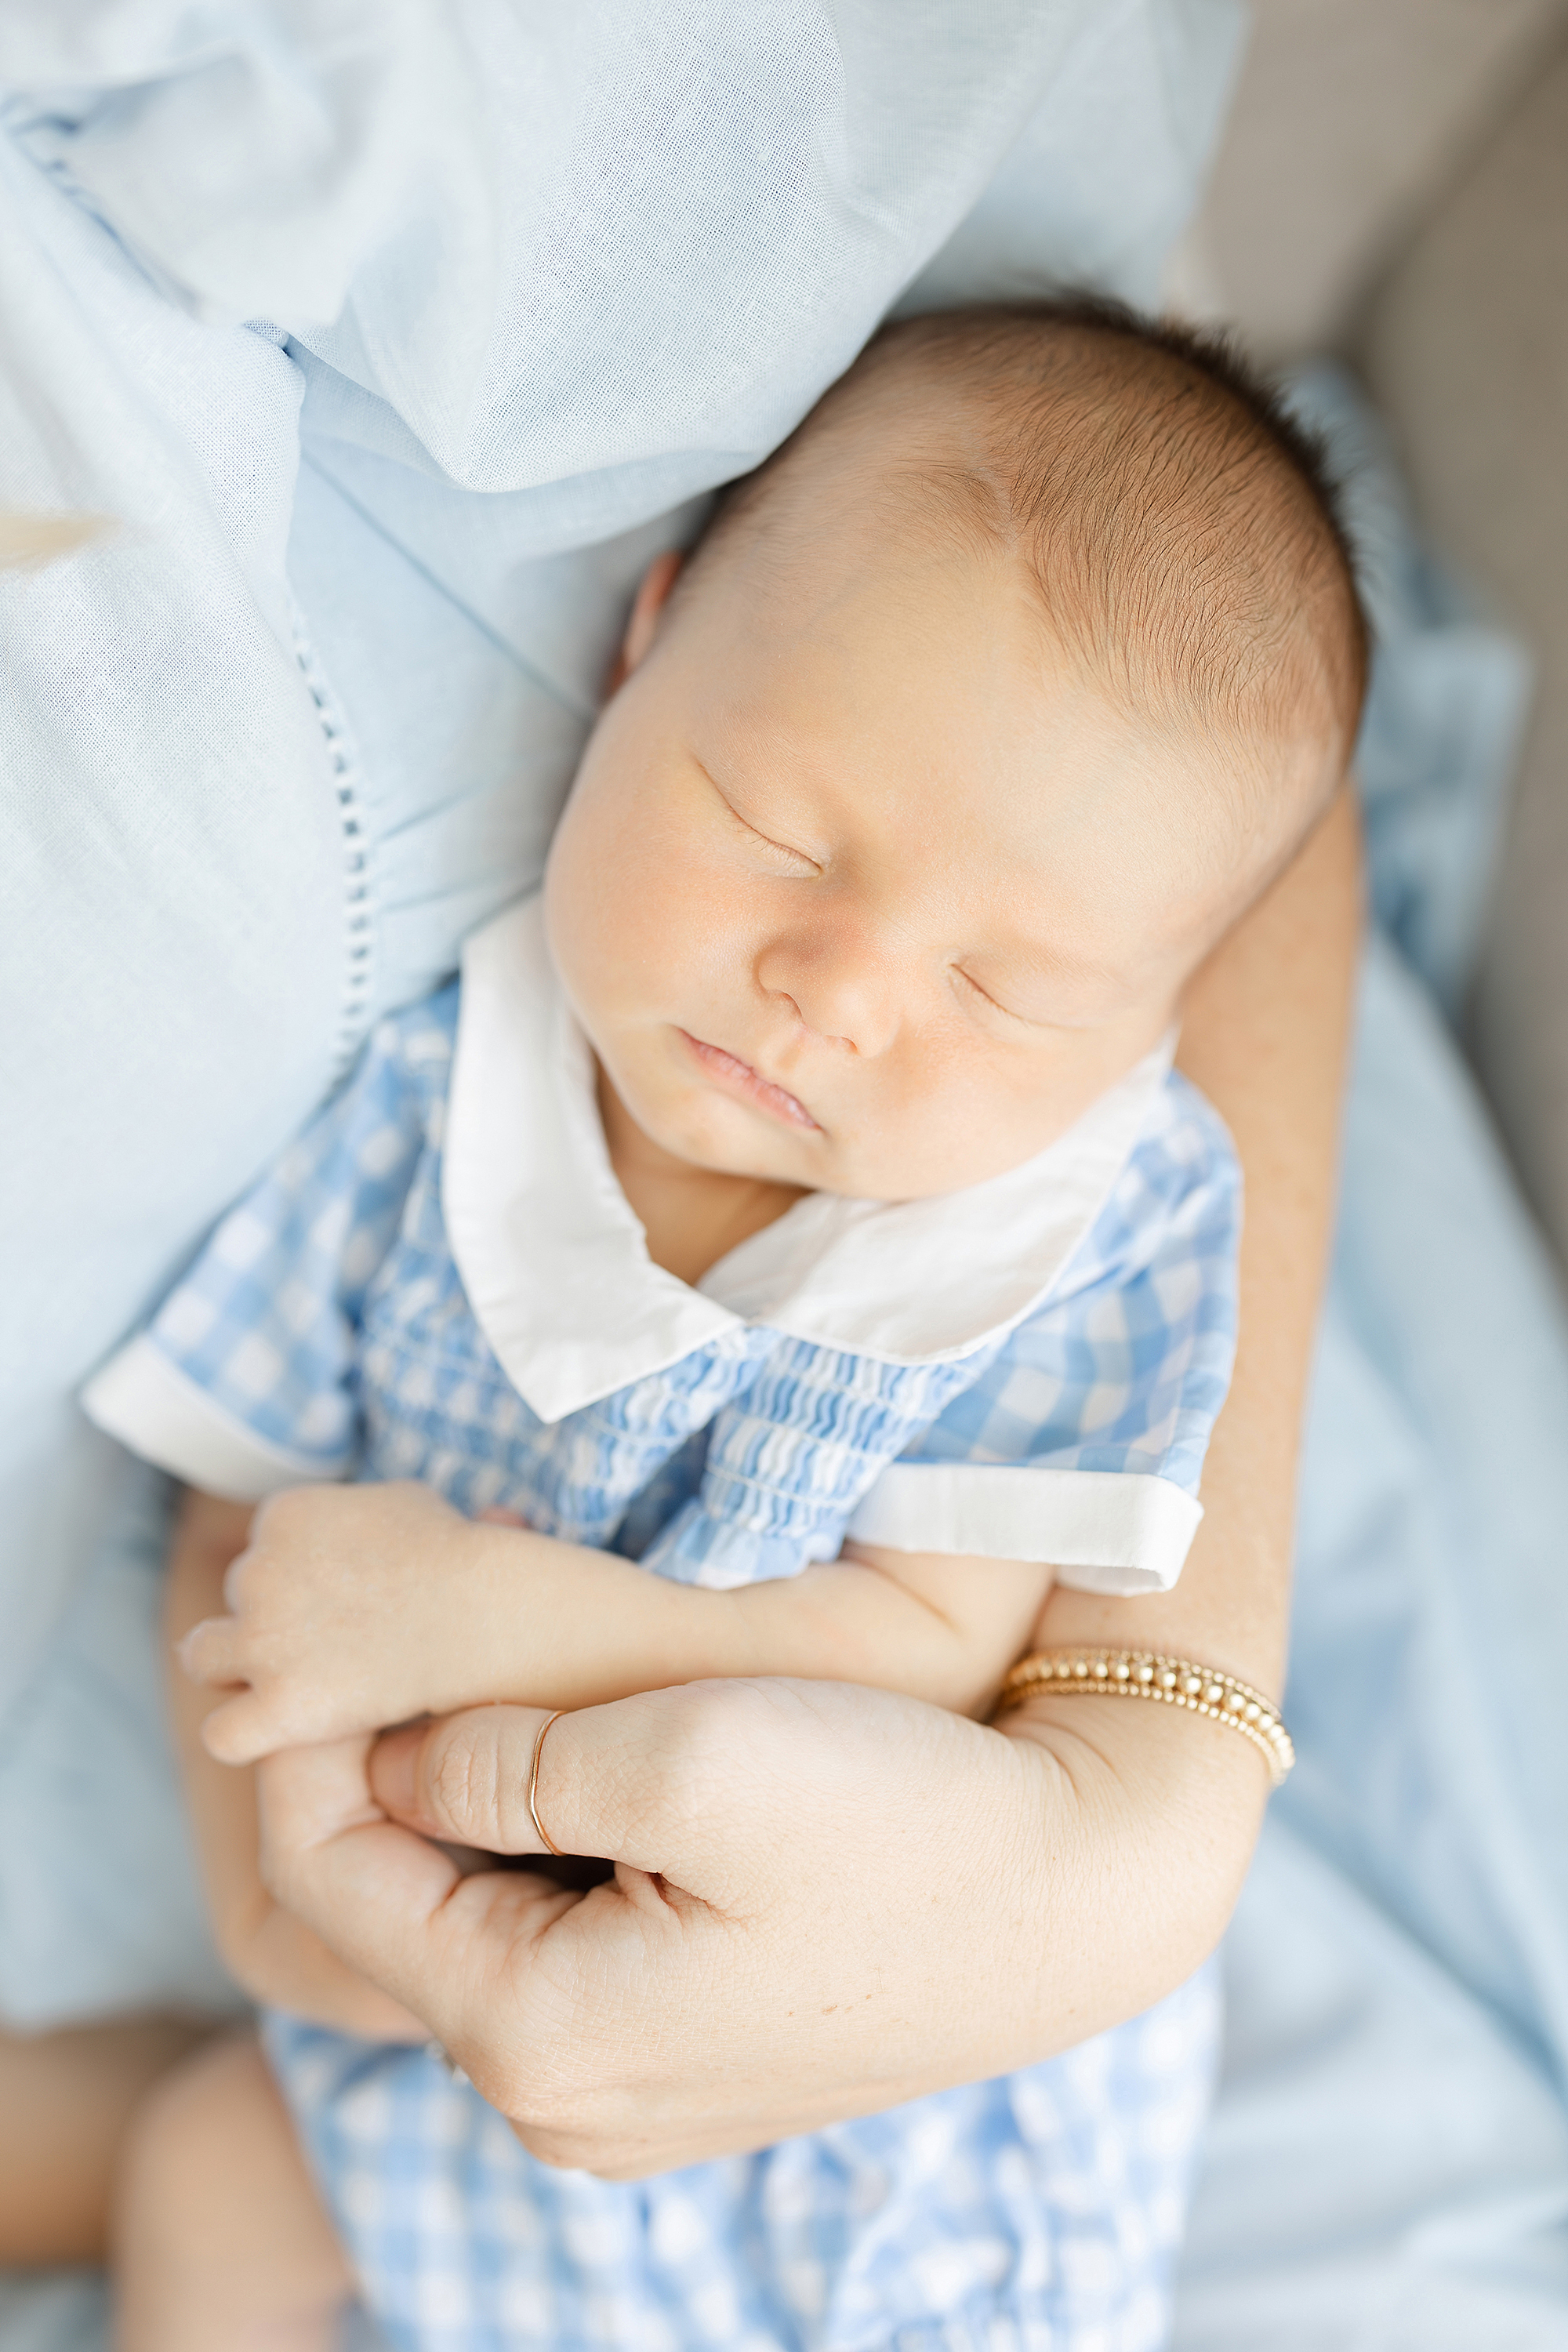 Newborn portrait of a baby boy dressed in blue and white checkered outfit.